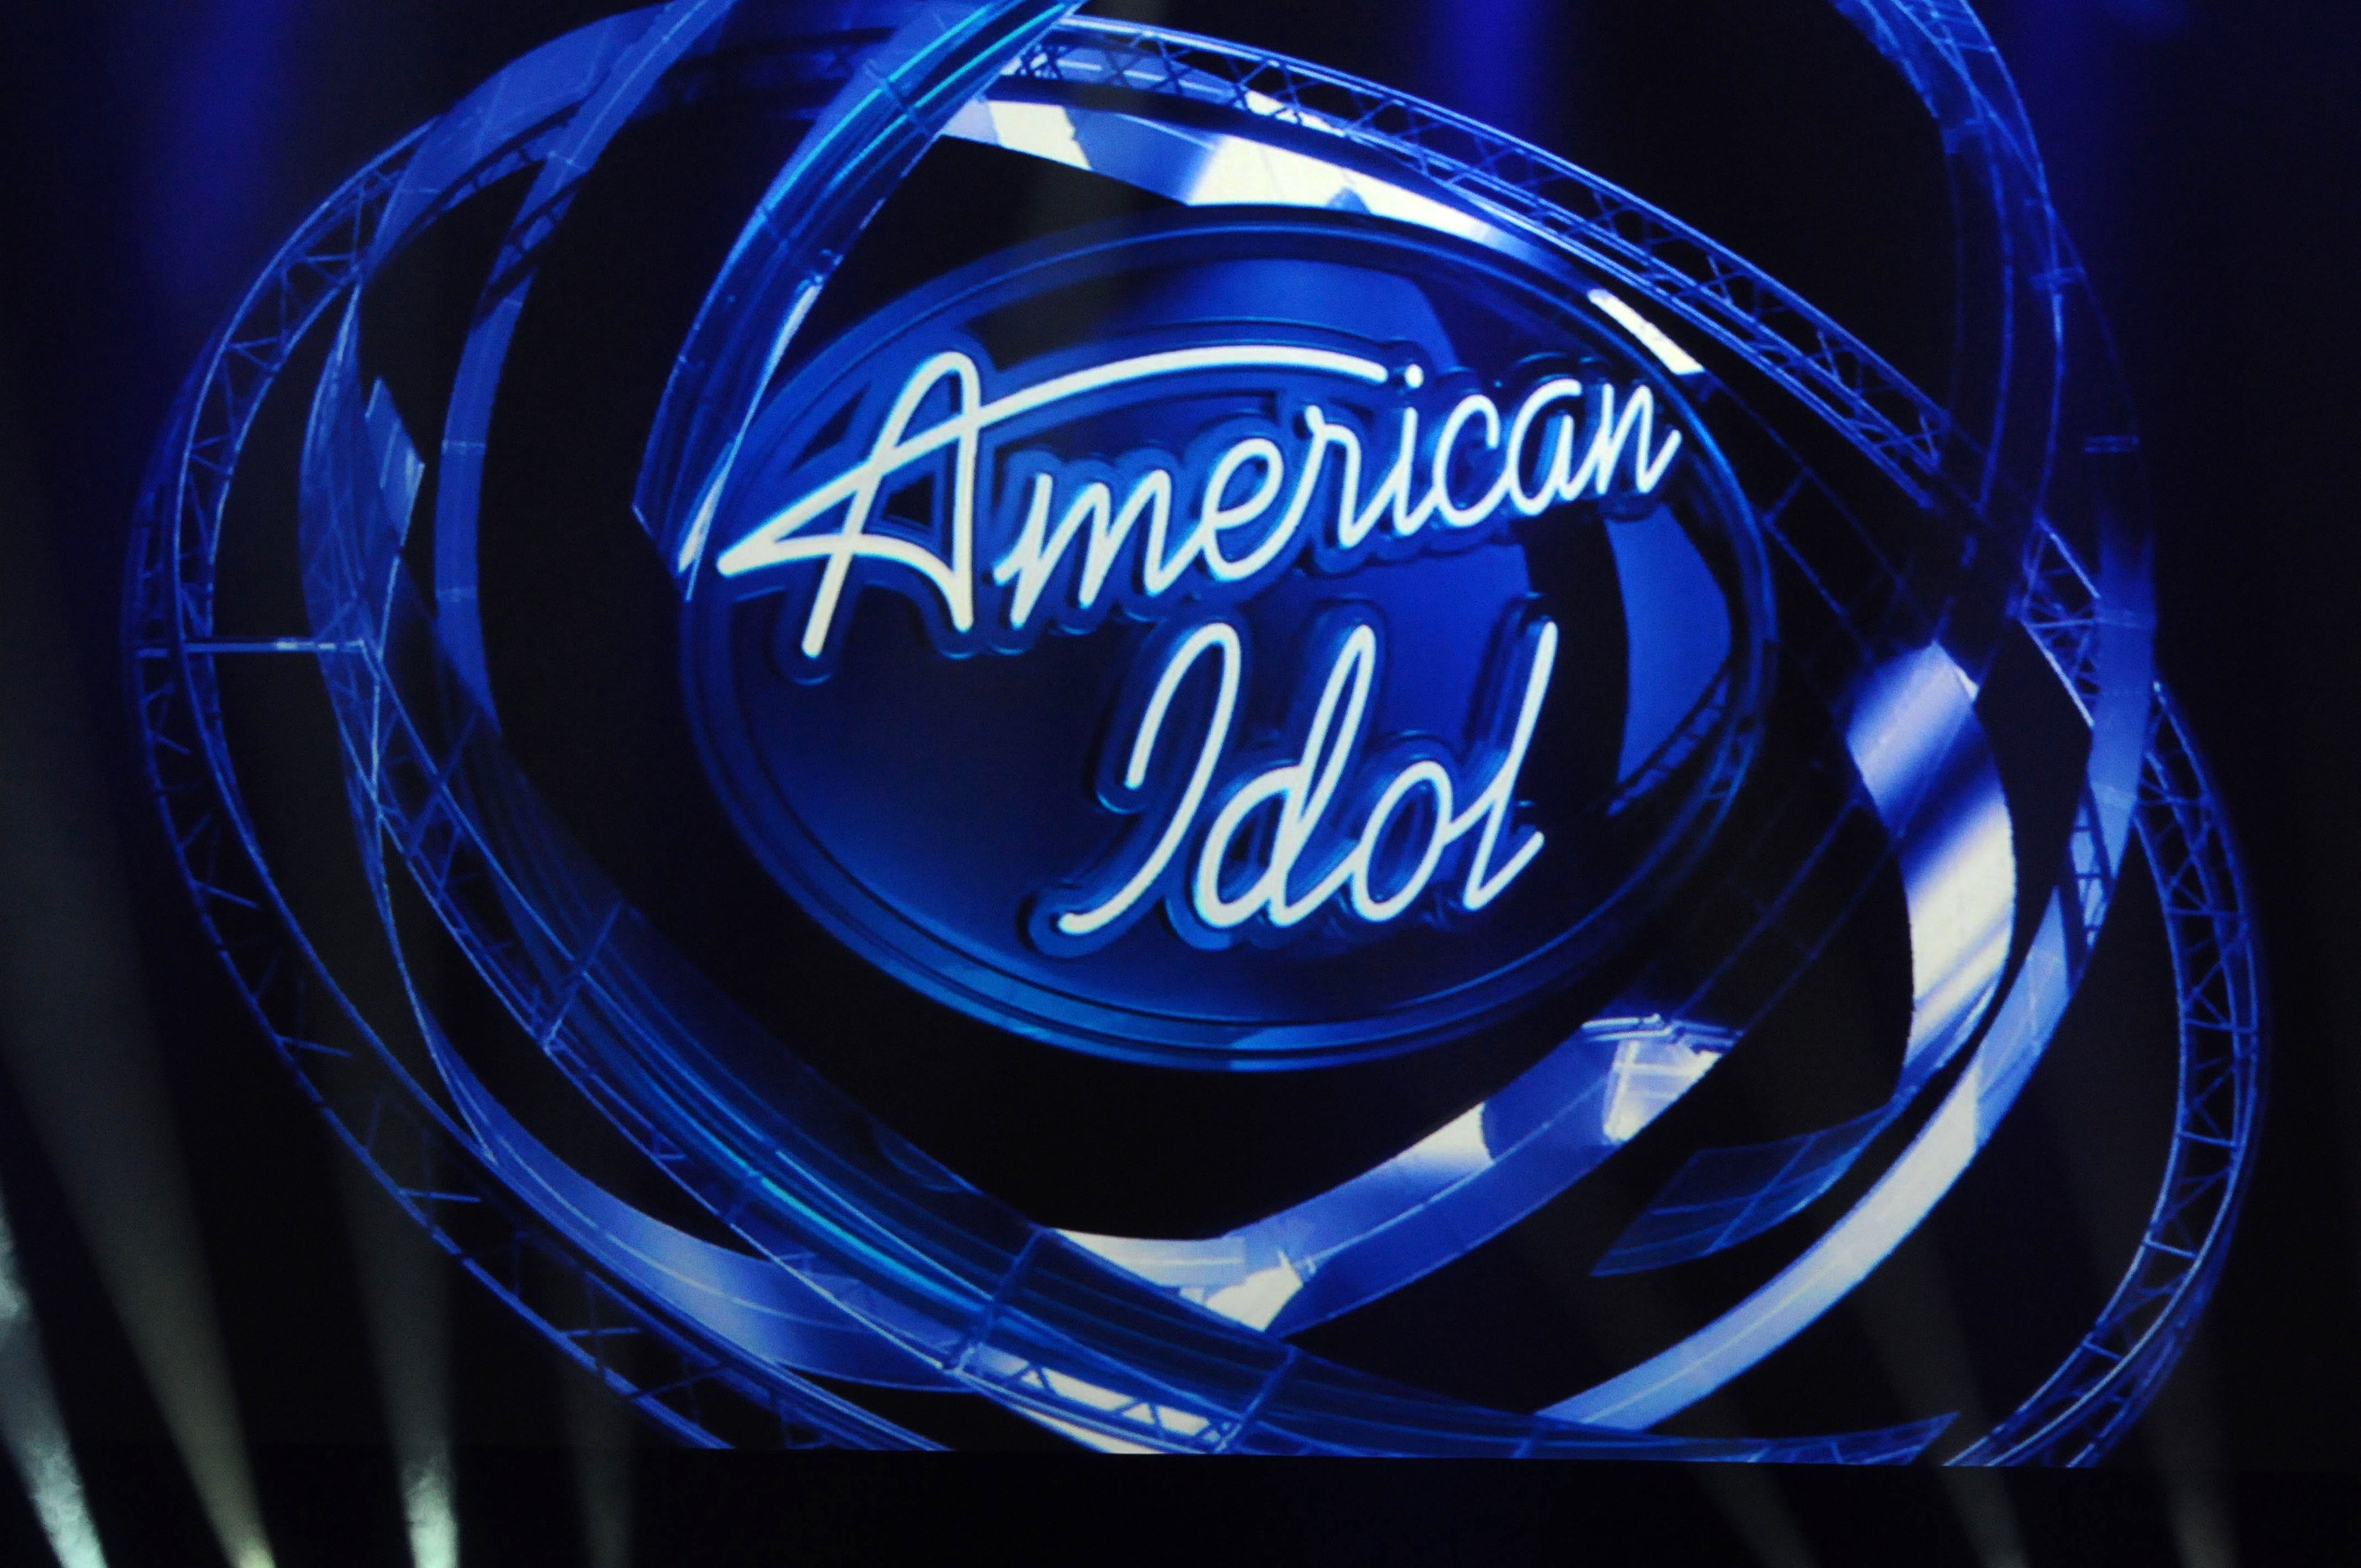 ServiceMax for iPad Wins TSIA Vision Award – American Idol of the Service Industry